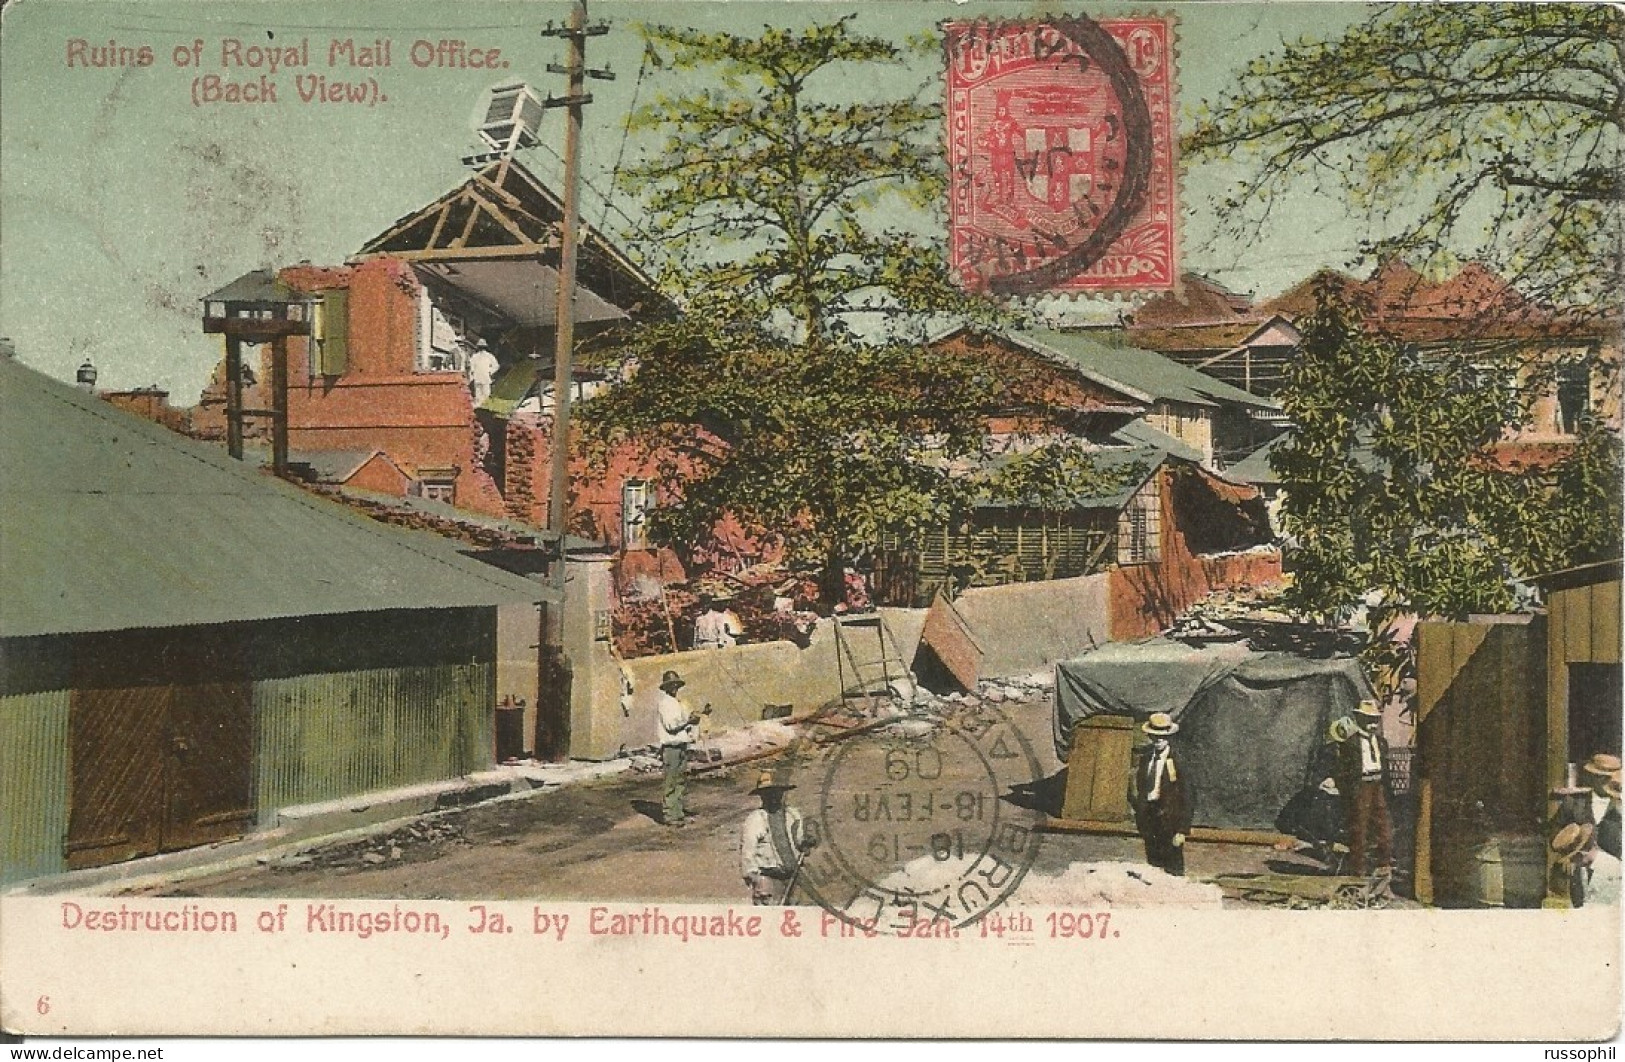 JAMAICA - DESTRUCTION OF KINGSTON, BY EARTHQUAKE AND FIRE JAN 14TH 1907 - RUINS OF ROYAL MAIL OFFICE - 1909 - Jamaica